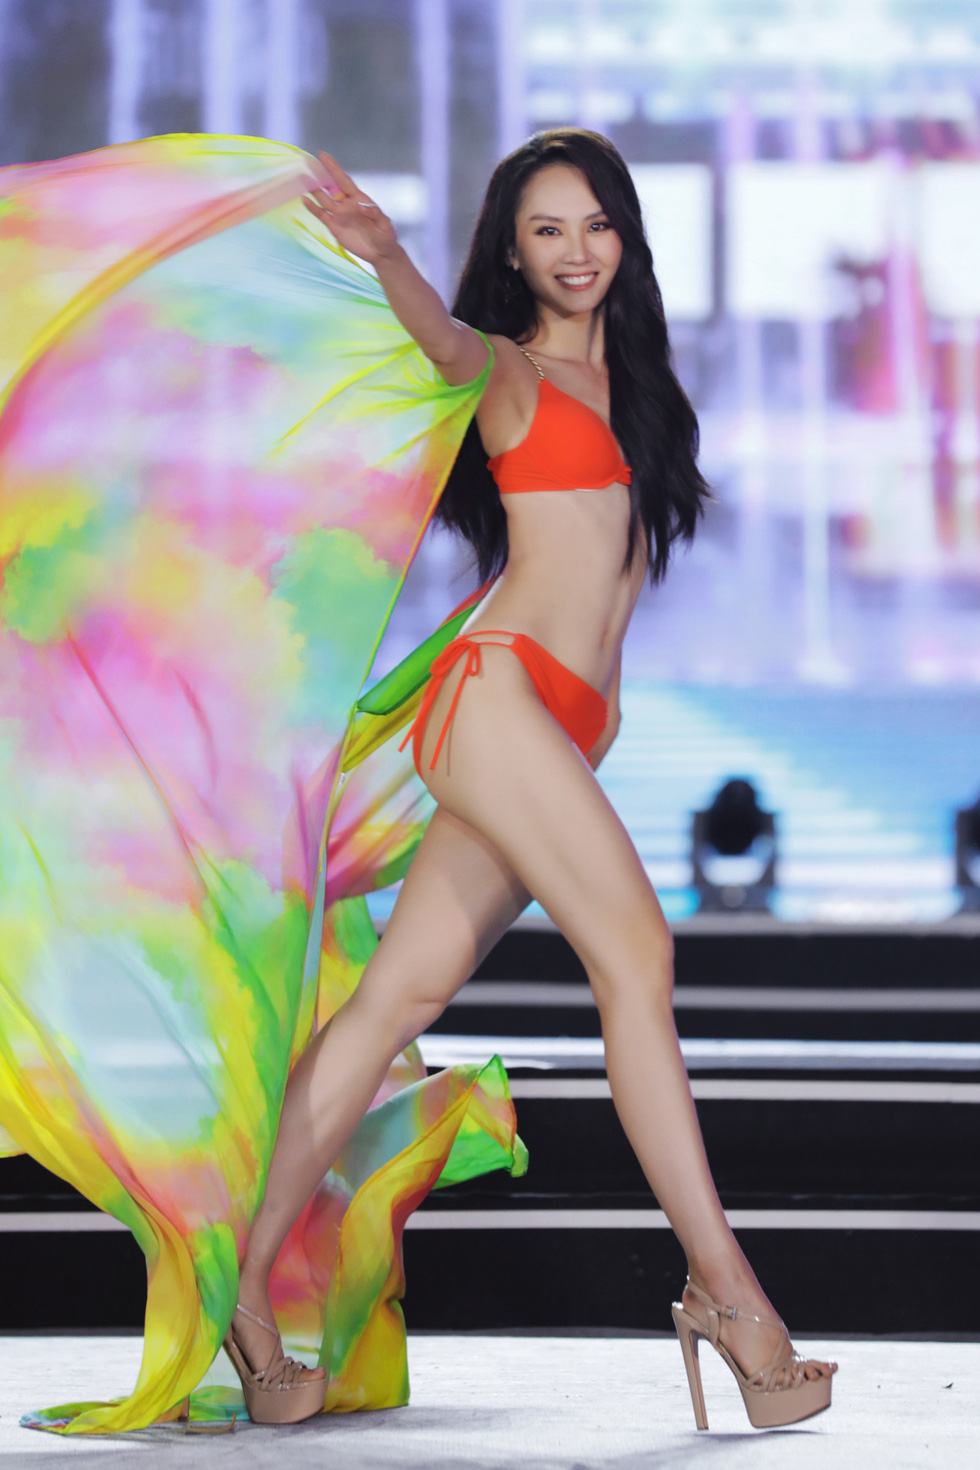 Huynh Nguyen Mai Phuong in her swimsuit during the swimsuit performance of Miss World Vietnam 2022. Photo: Hoai Phuong / Tuoi Tre